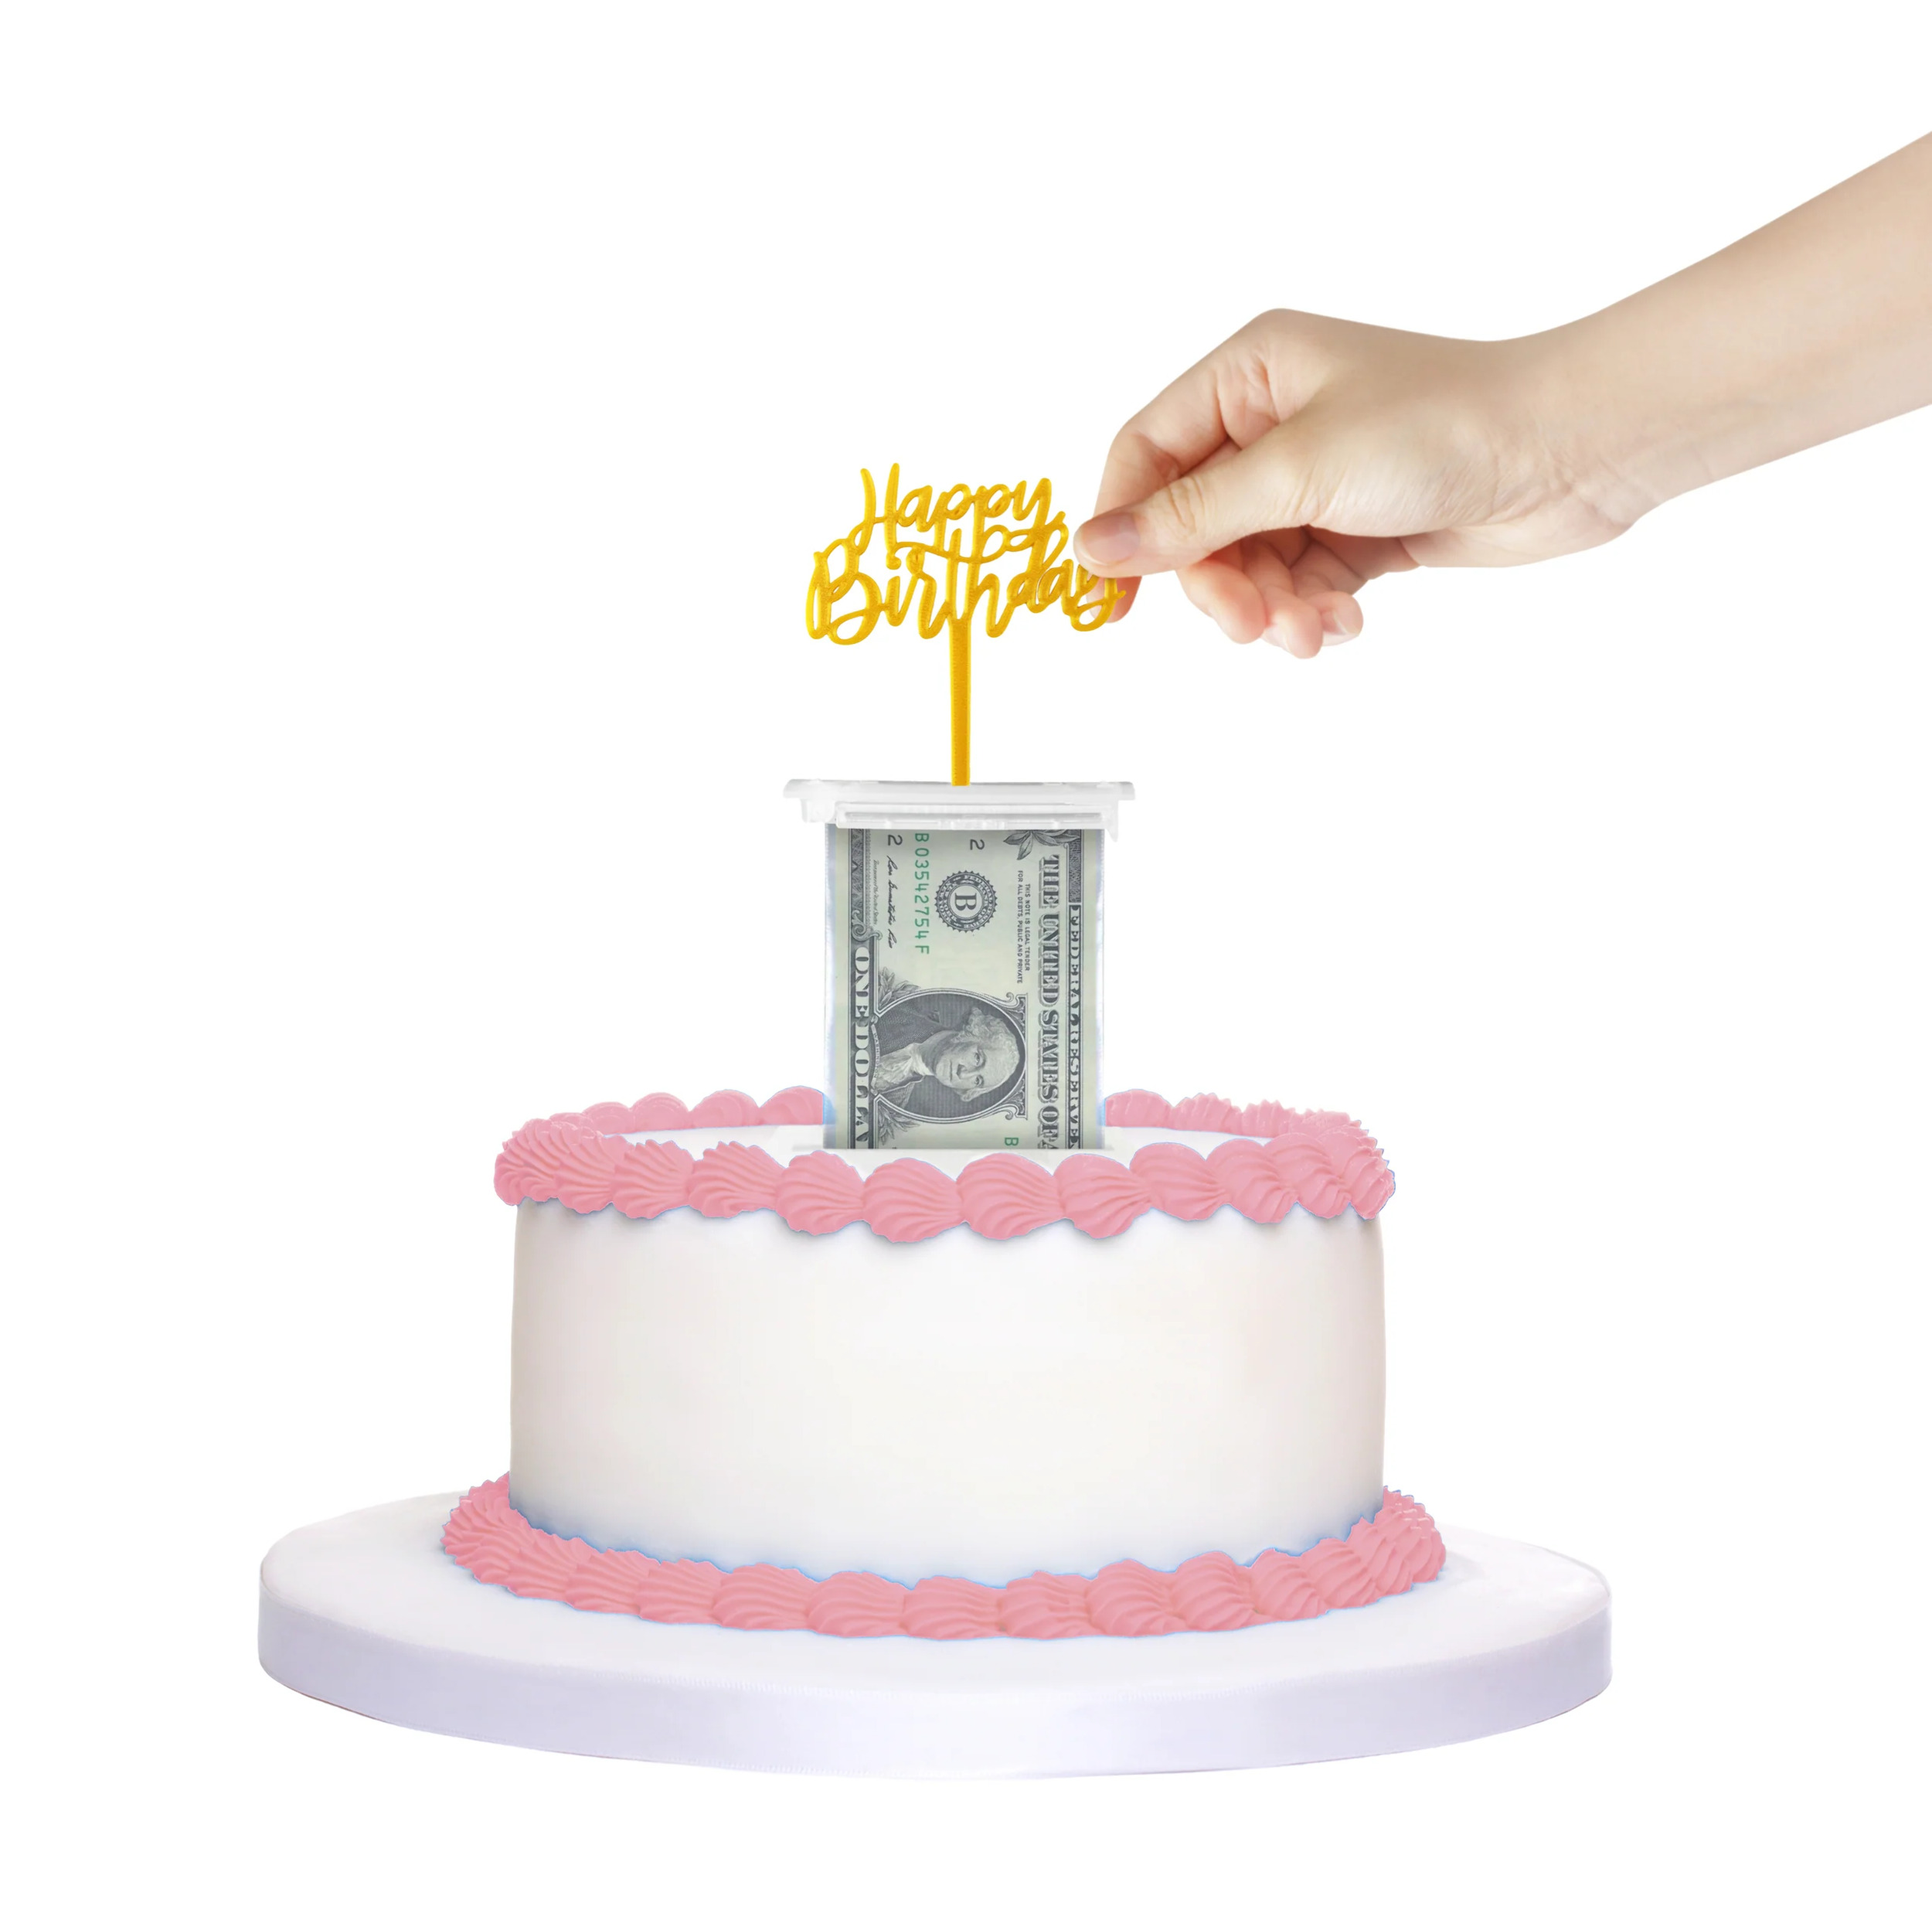 Birthday Cake Topper, by The Money Cake - image 1 of 6